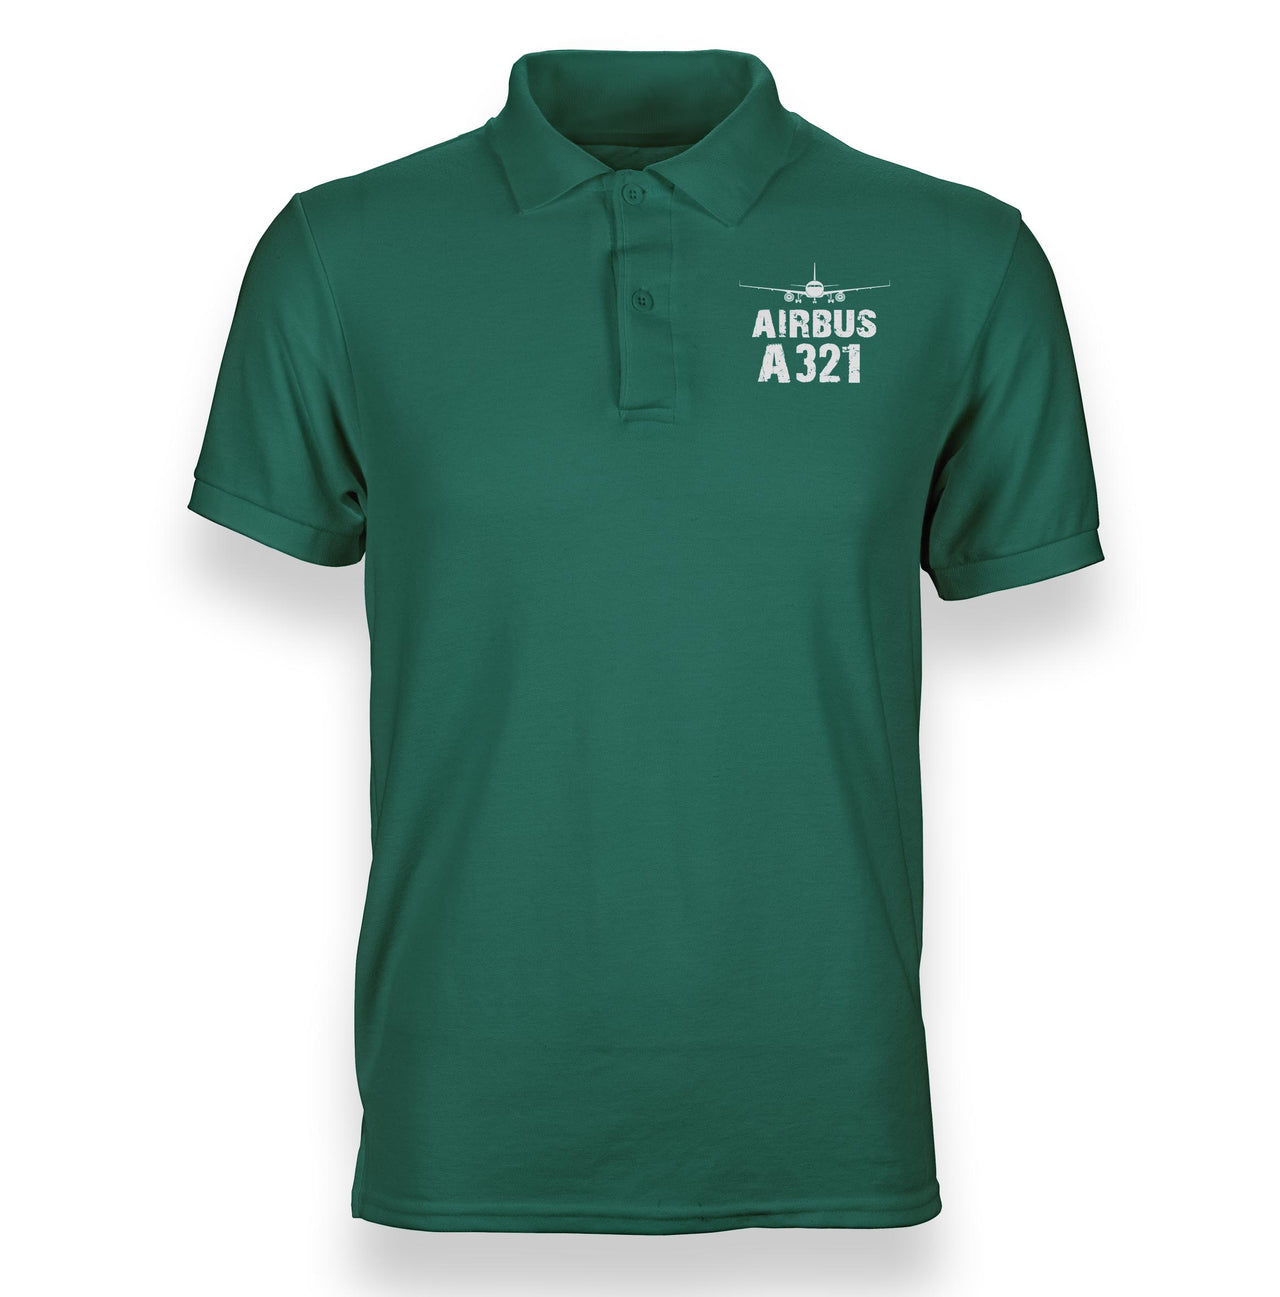 Airbus A321 & Plane Designed Polo T-Shirts